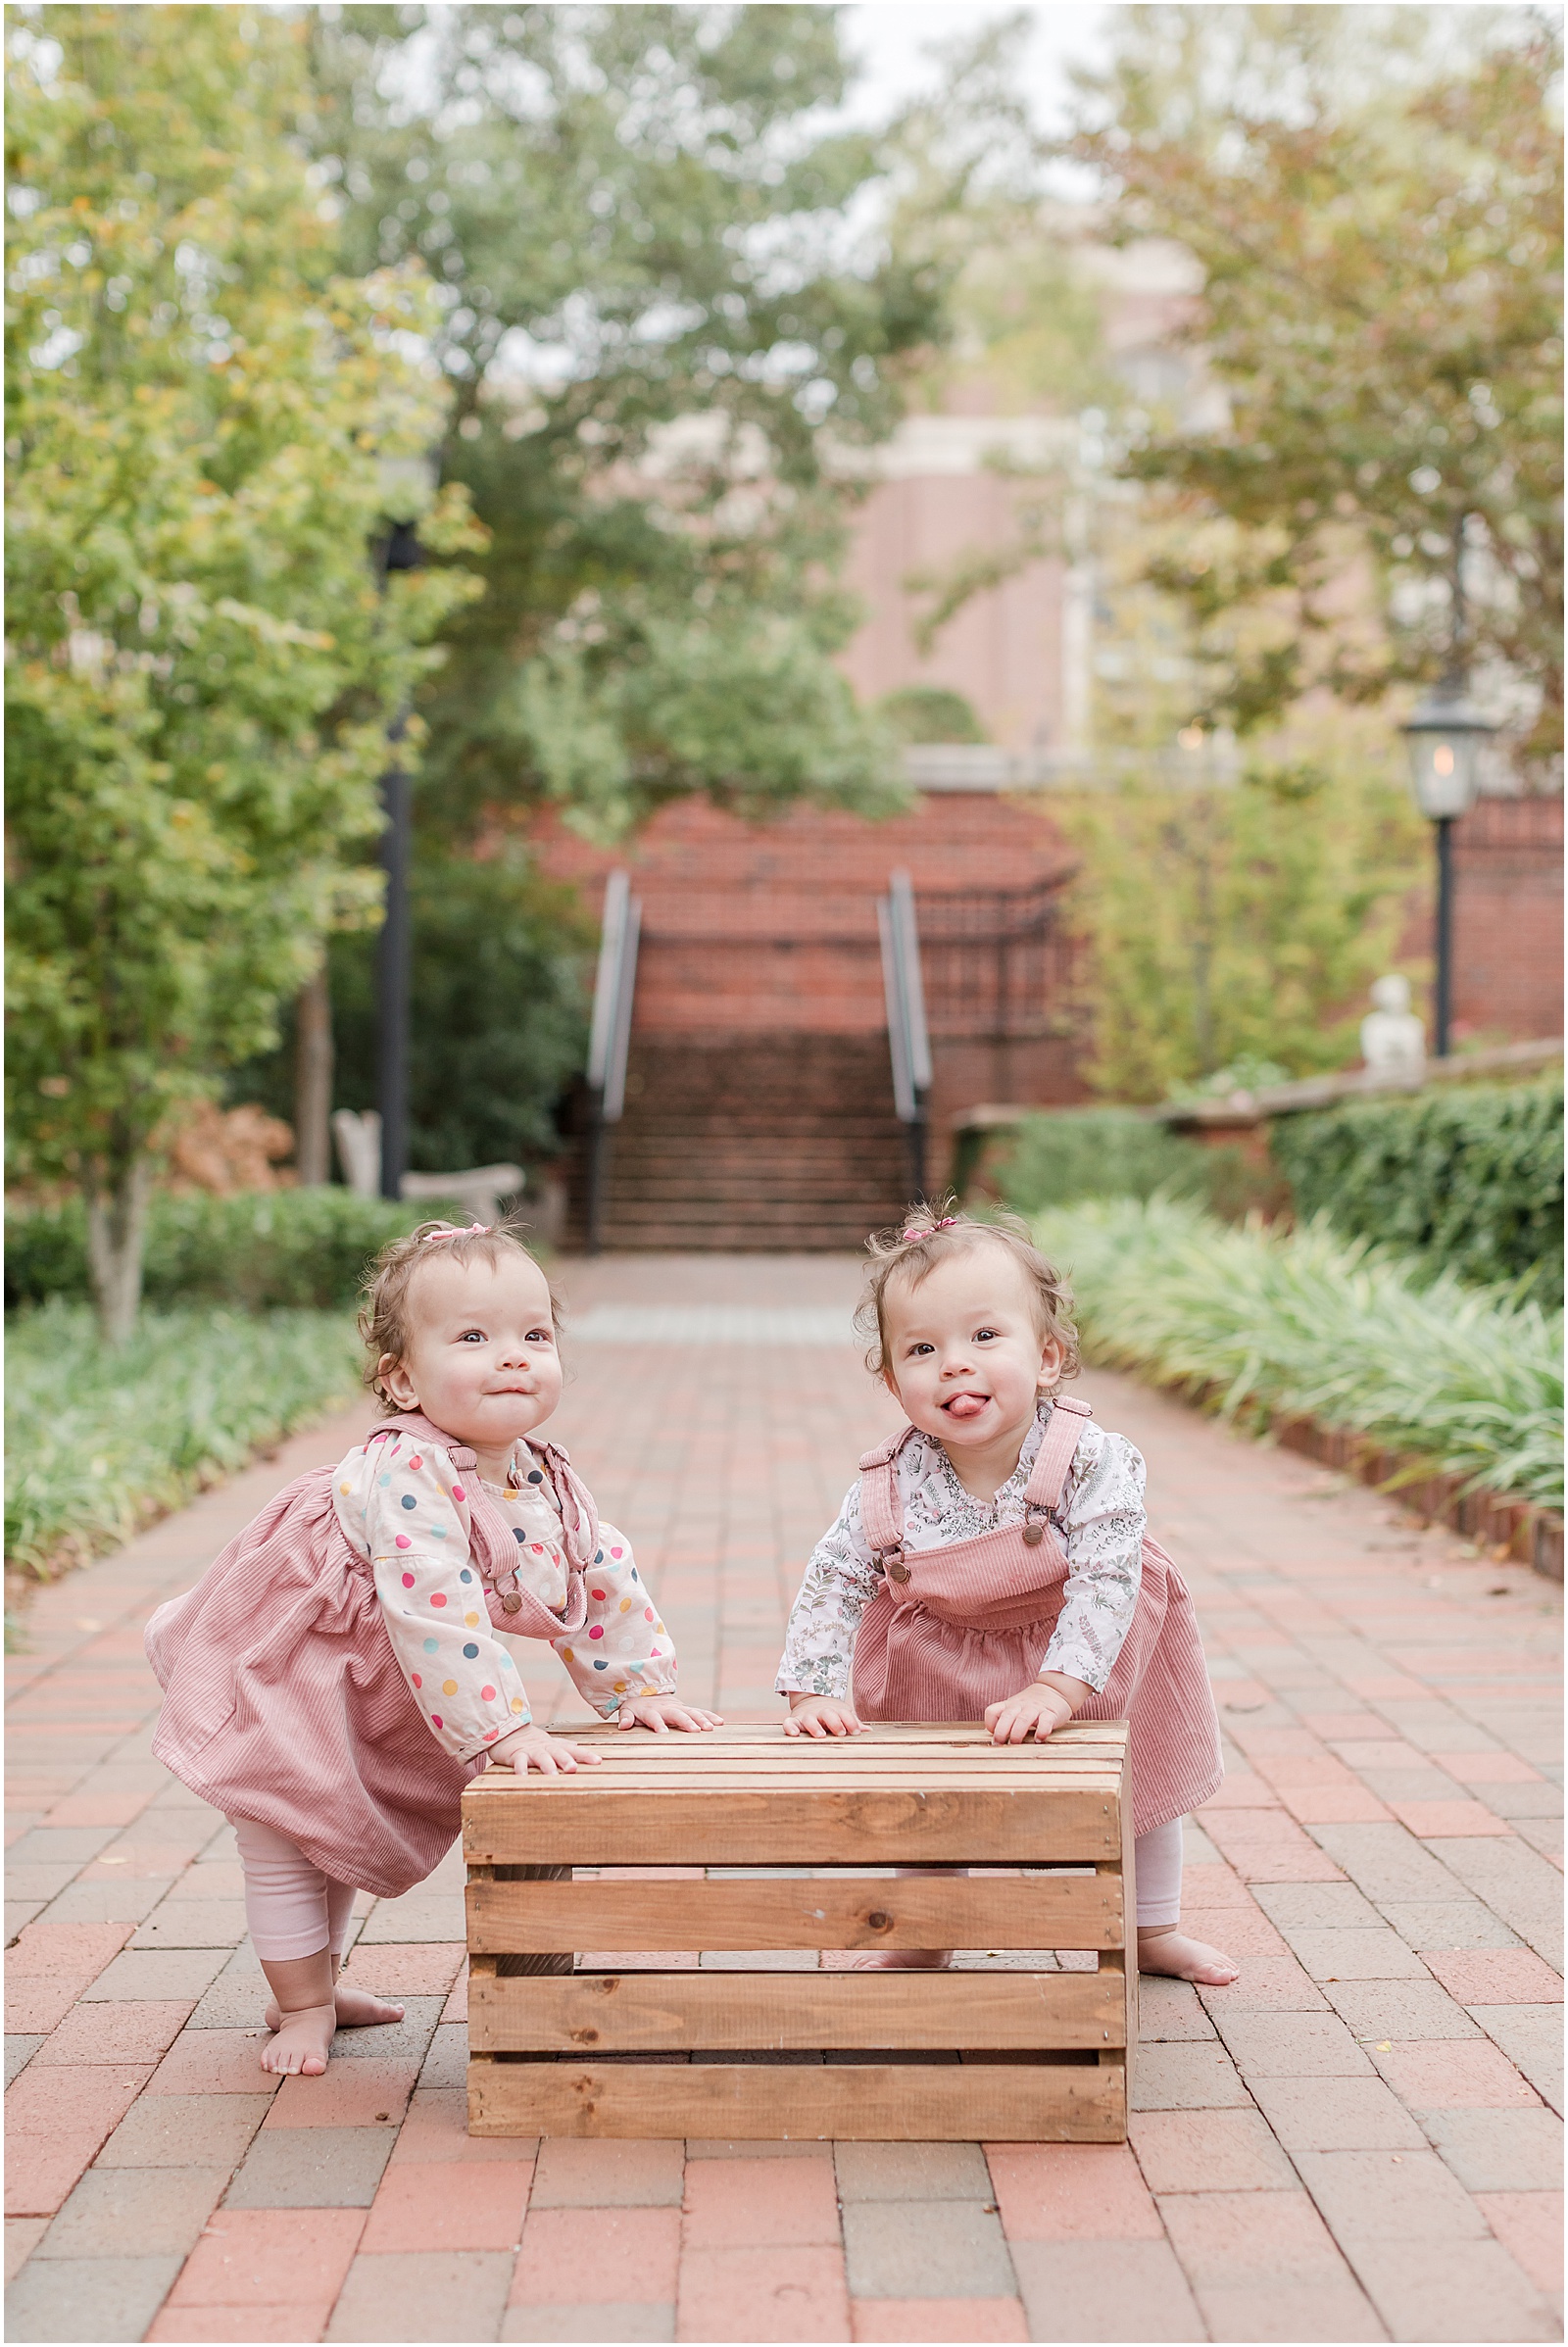 Twin one year olds posing for a photo on a brick pathway